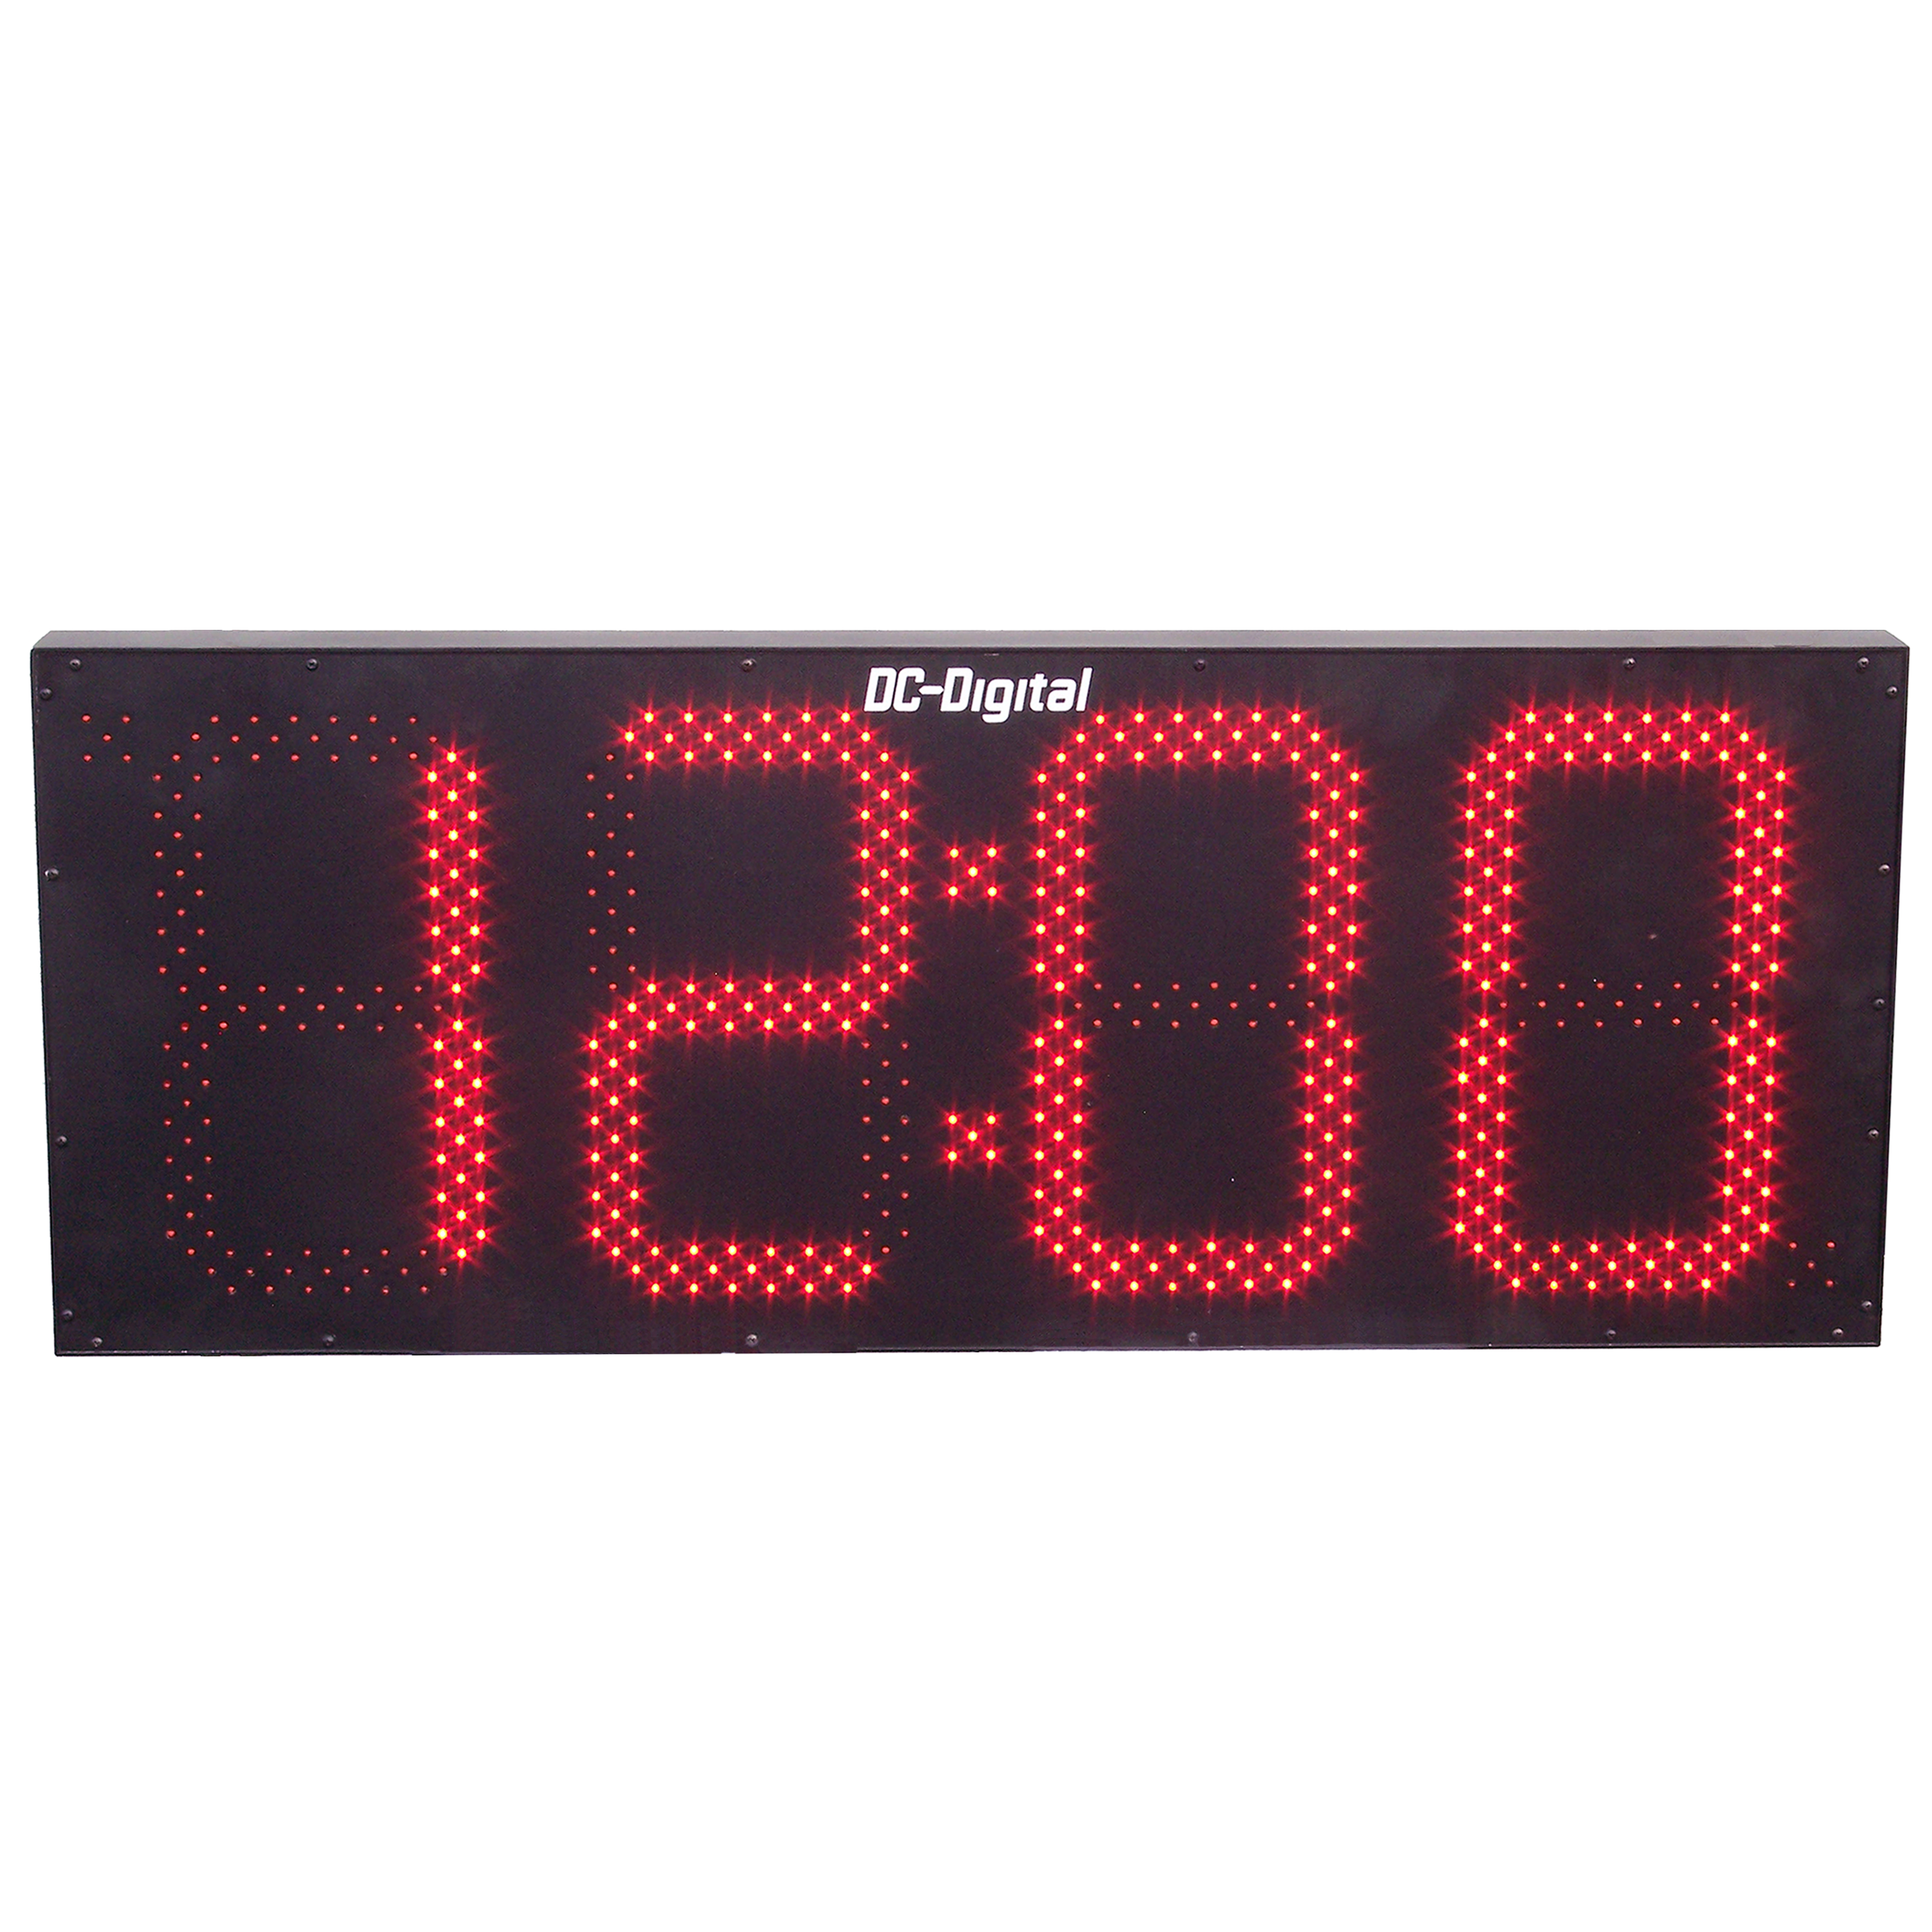 (DC-150-W-System) 15 Inch LED Digital, RF-Wireless Synchronized System, Time of Day Clock, with Store and Forward (OUTDOOR)